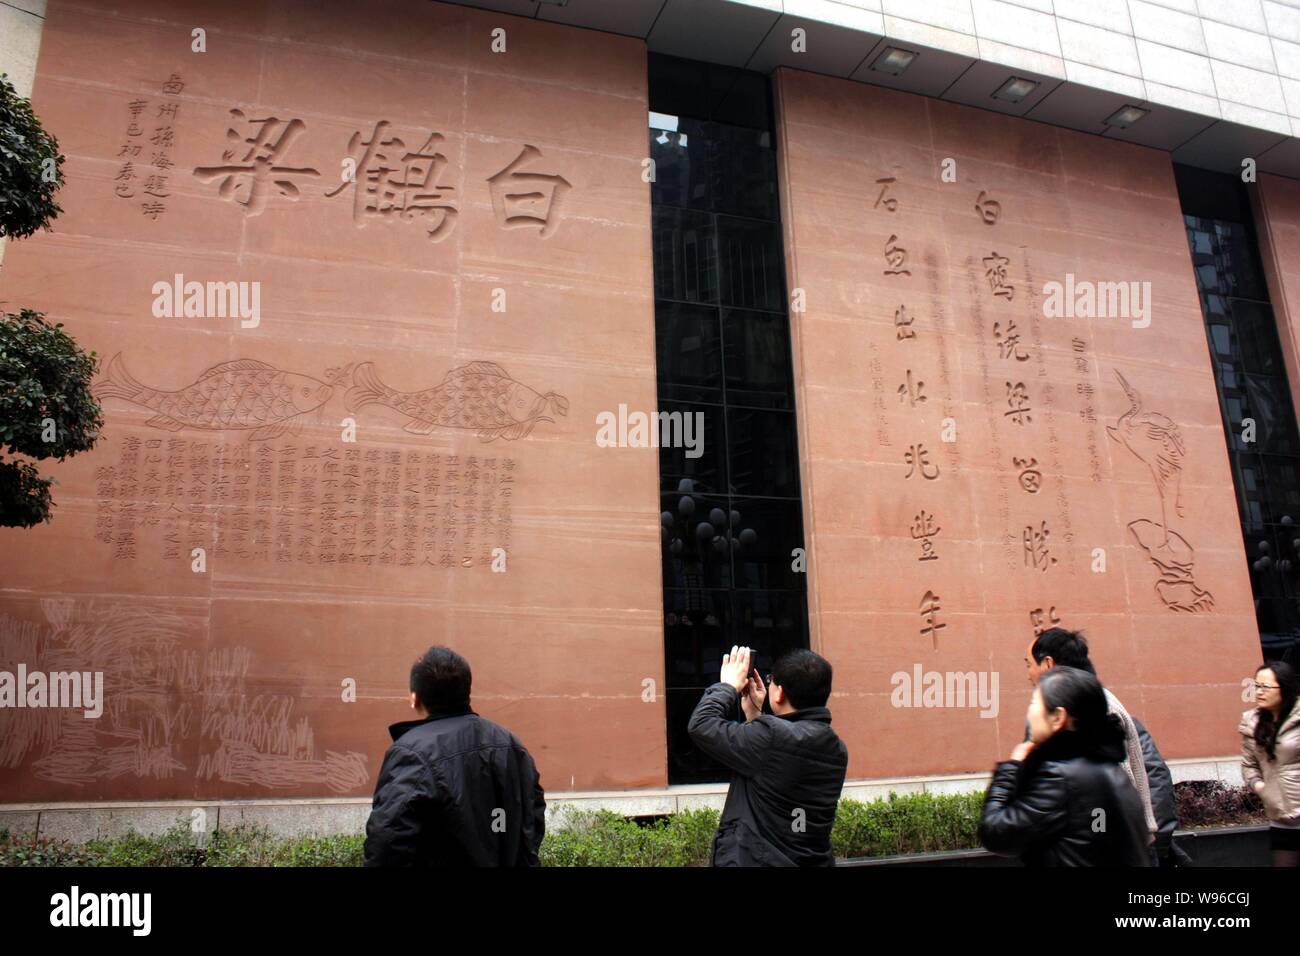 Visitors read the introduction of Baiheliang outside the underwater museum in Chongqing, China, 12 March 2012.   Baiheliang, an ancient hydrological m Stock Photo